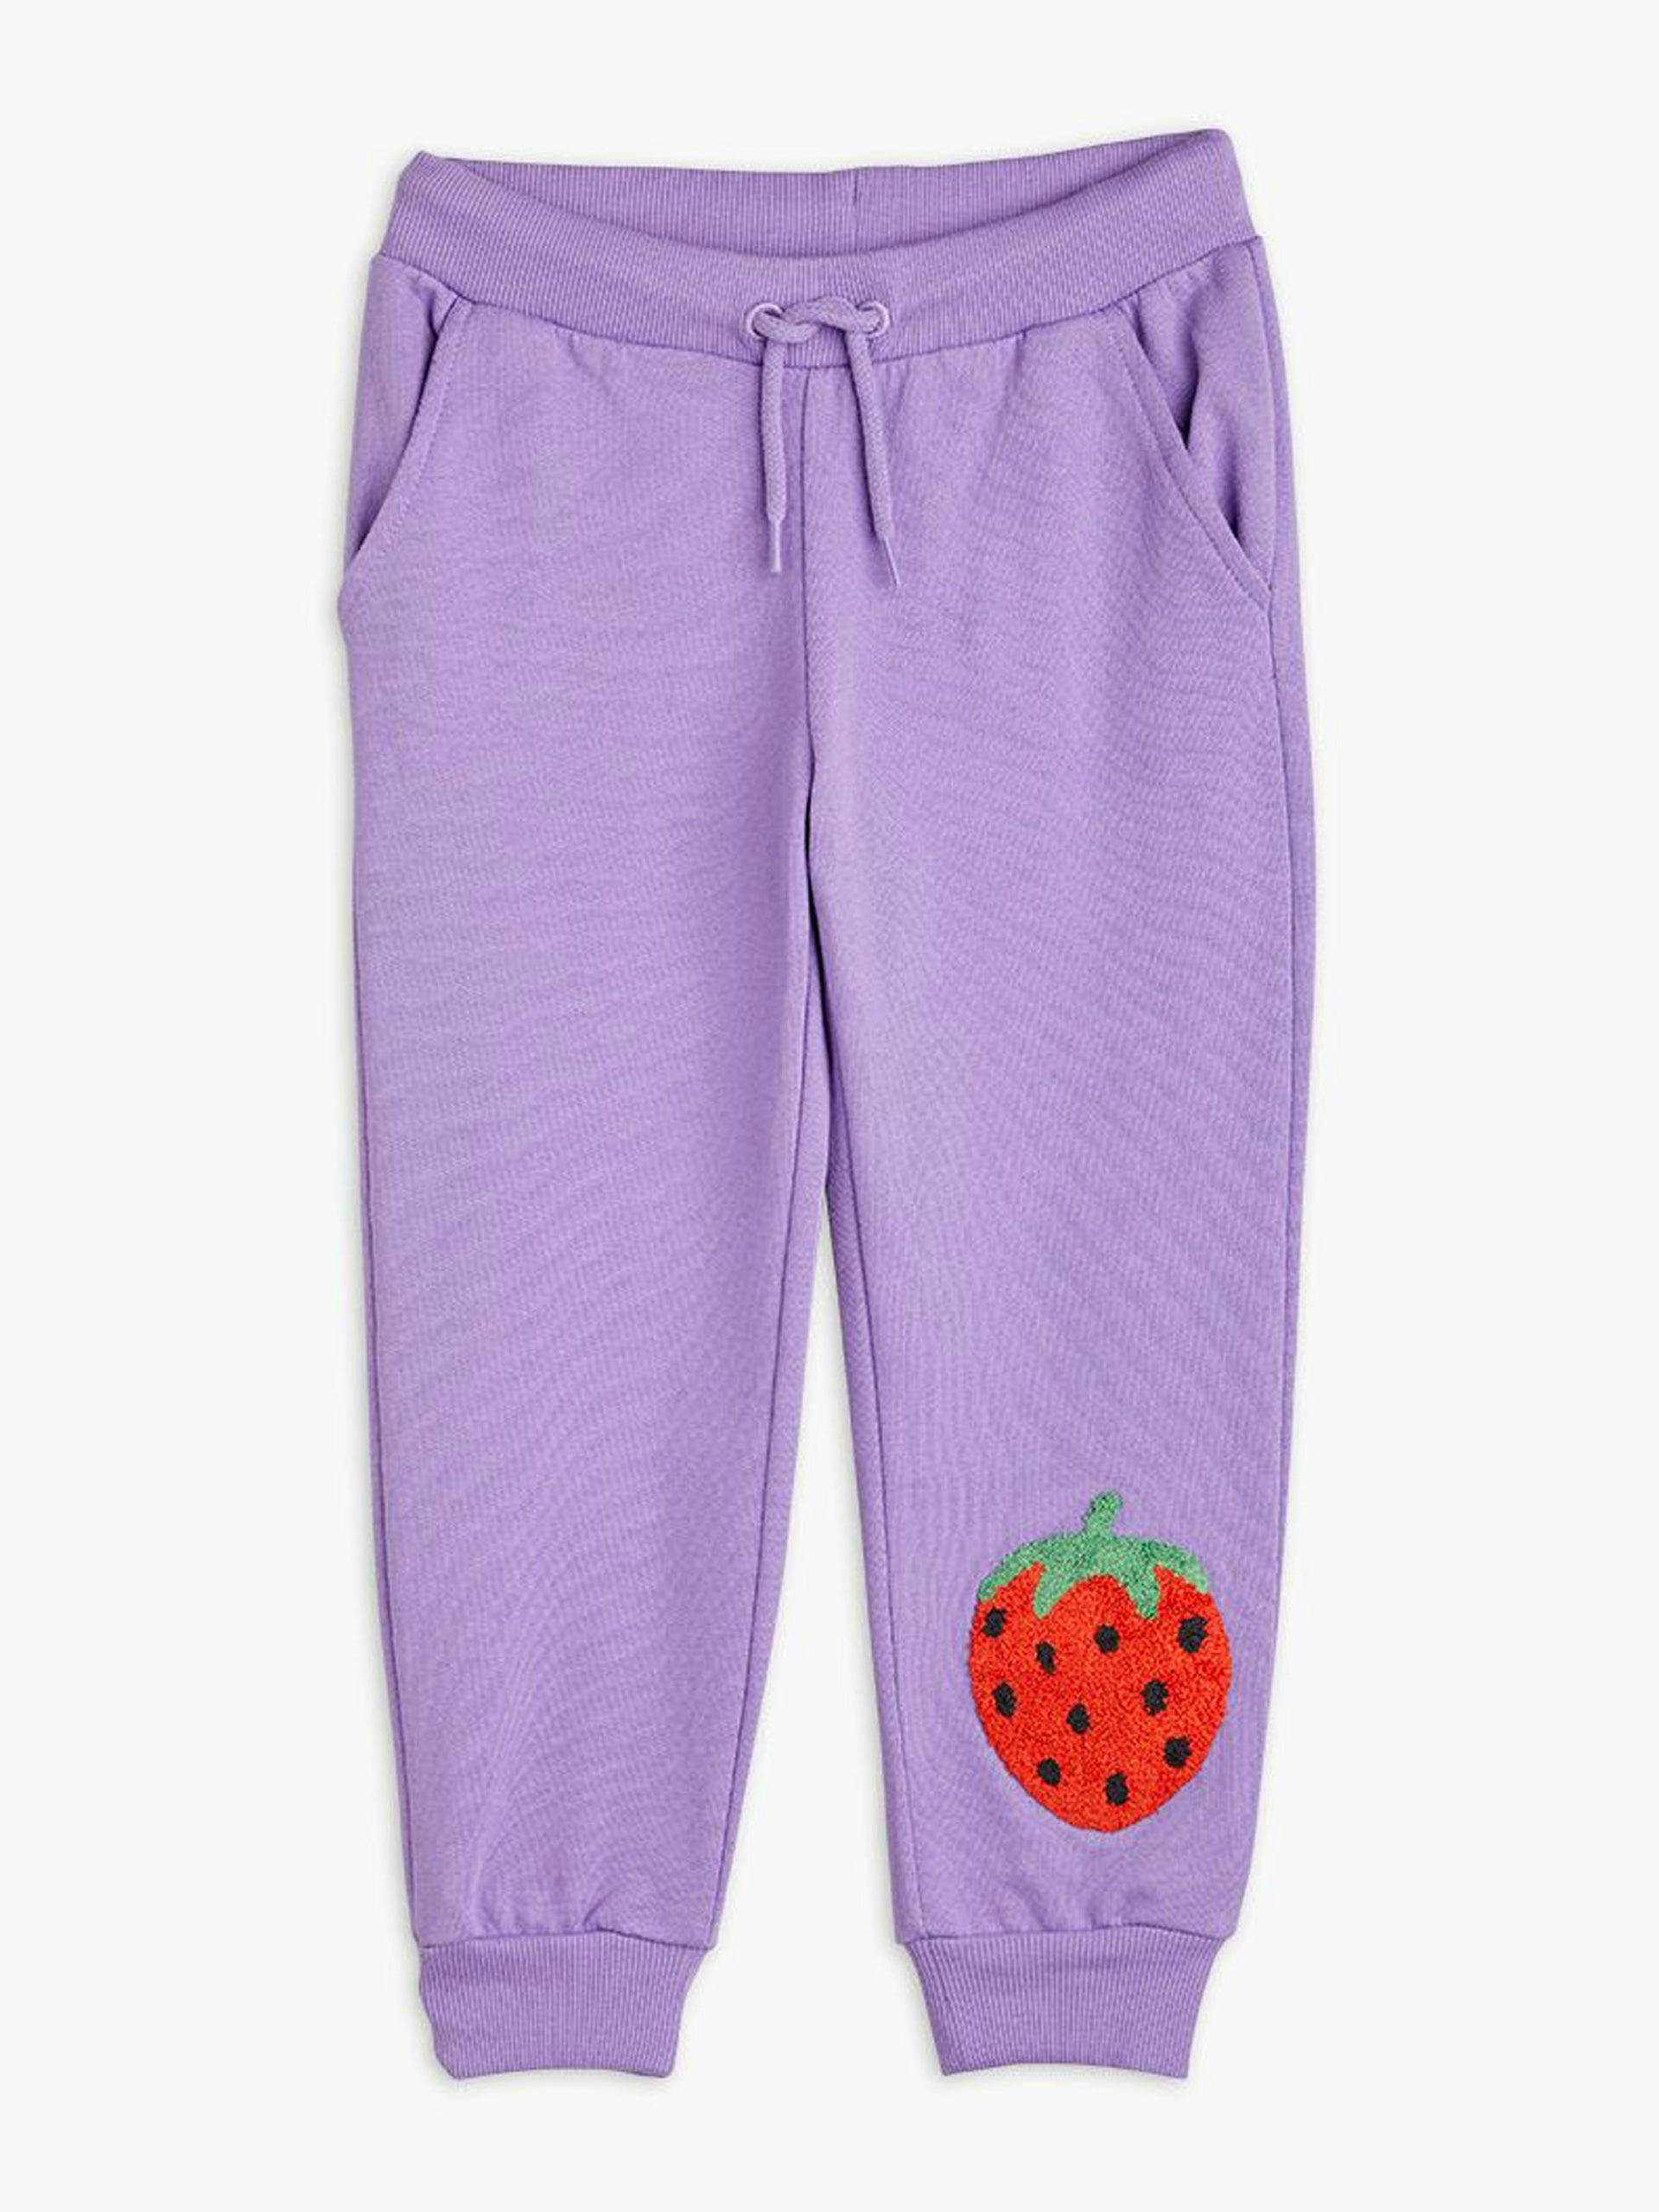 Strawberry embroidered sweatpants